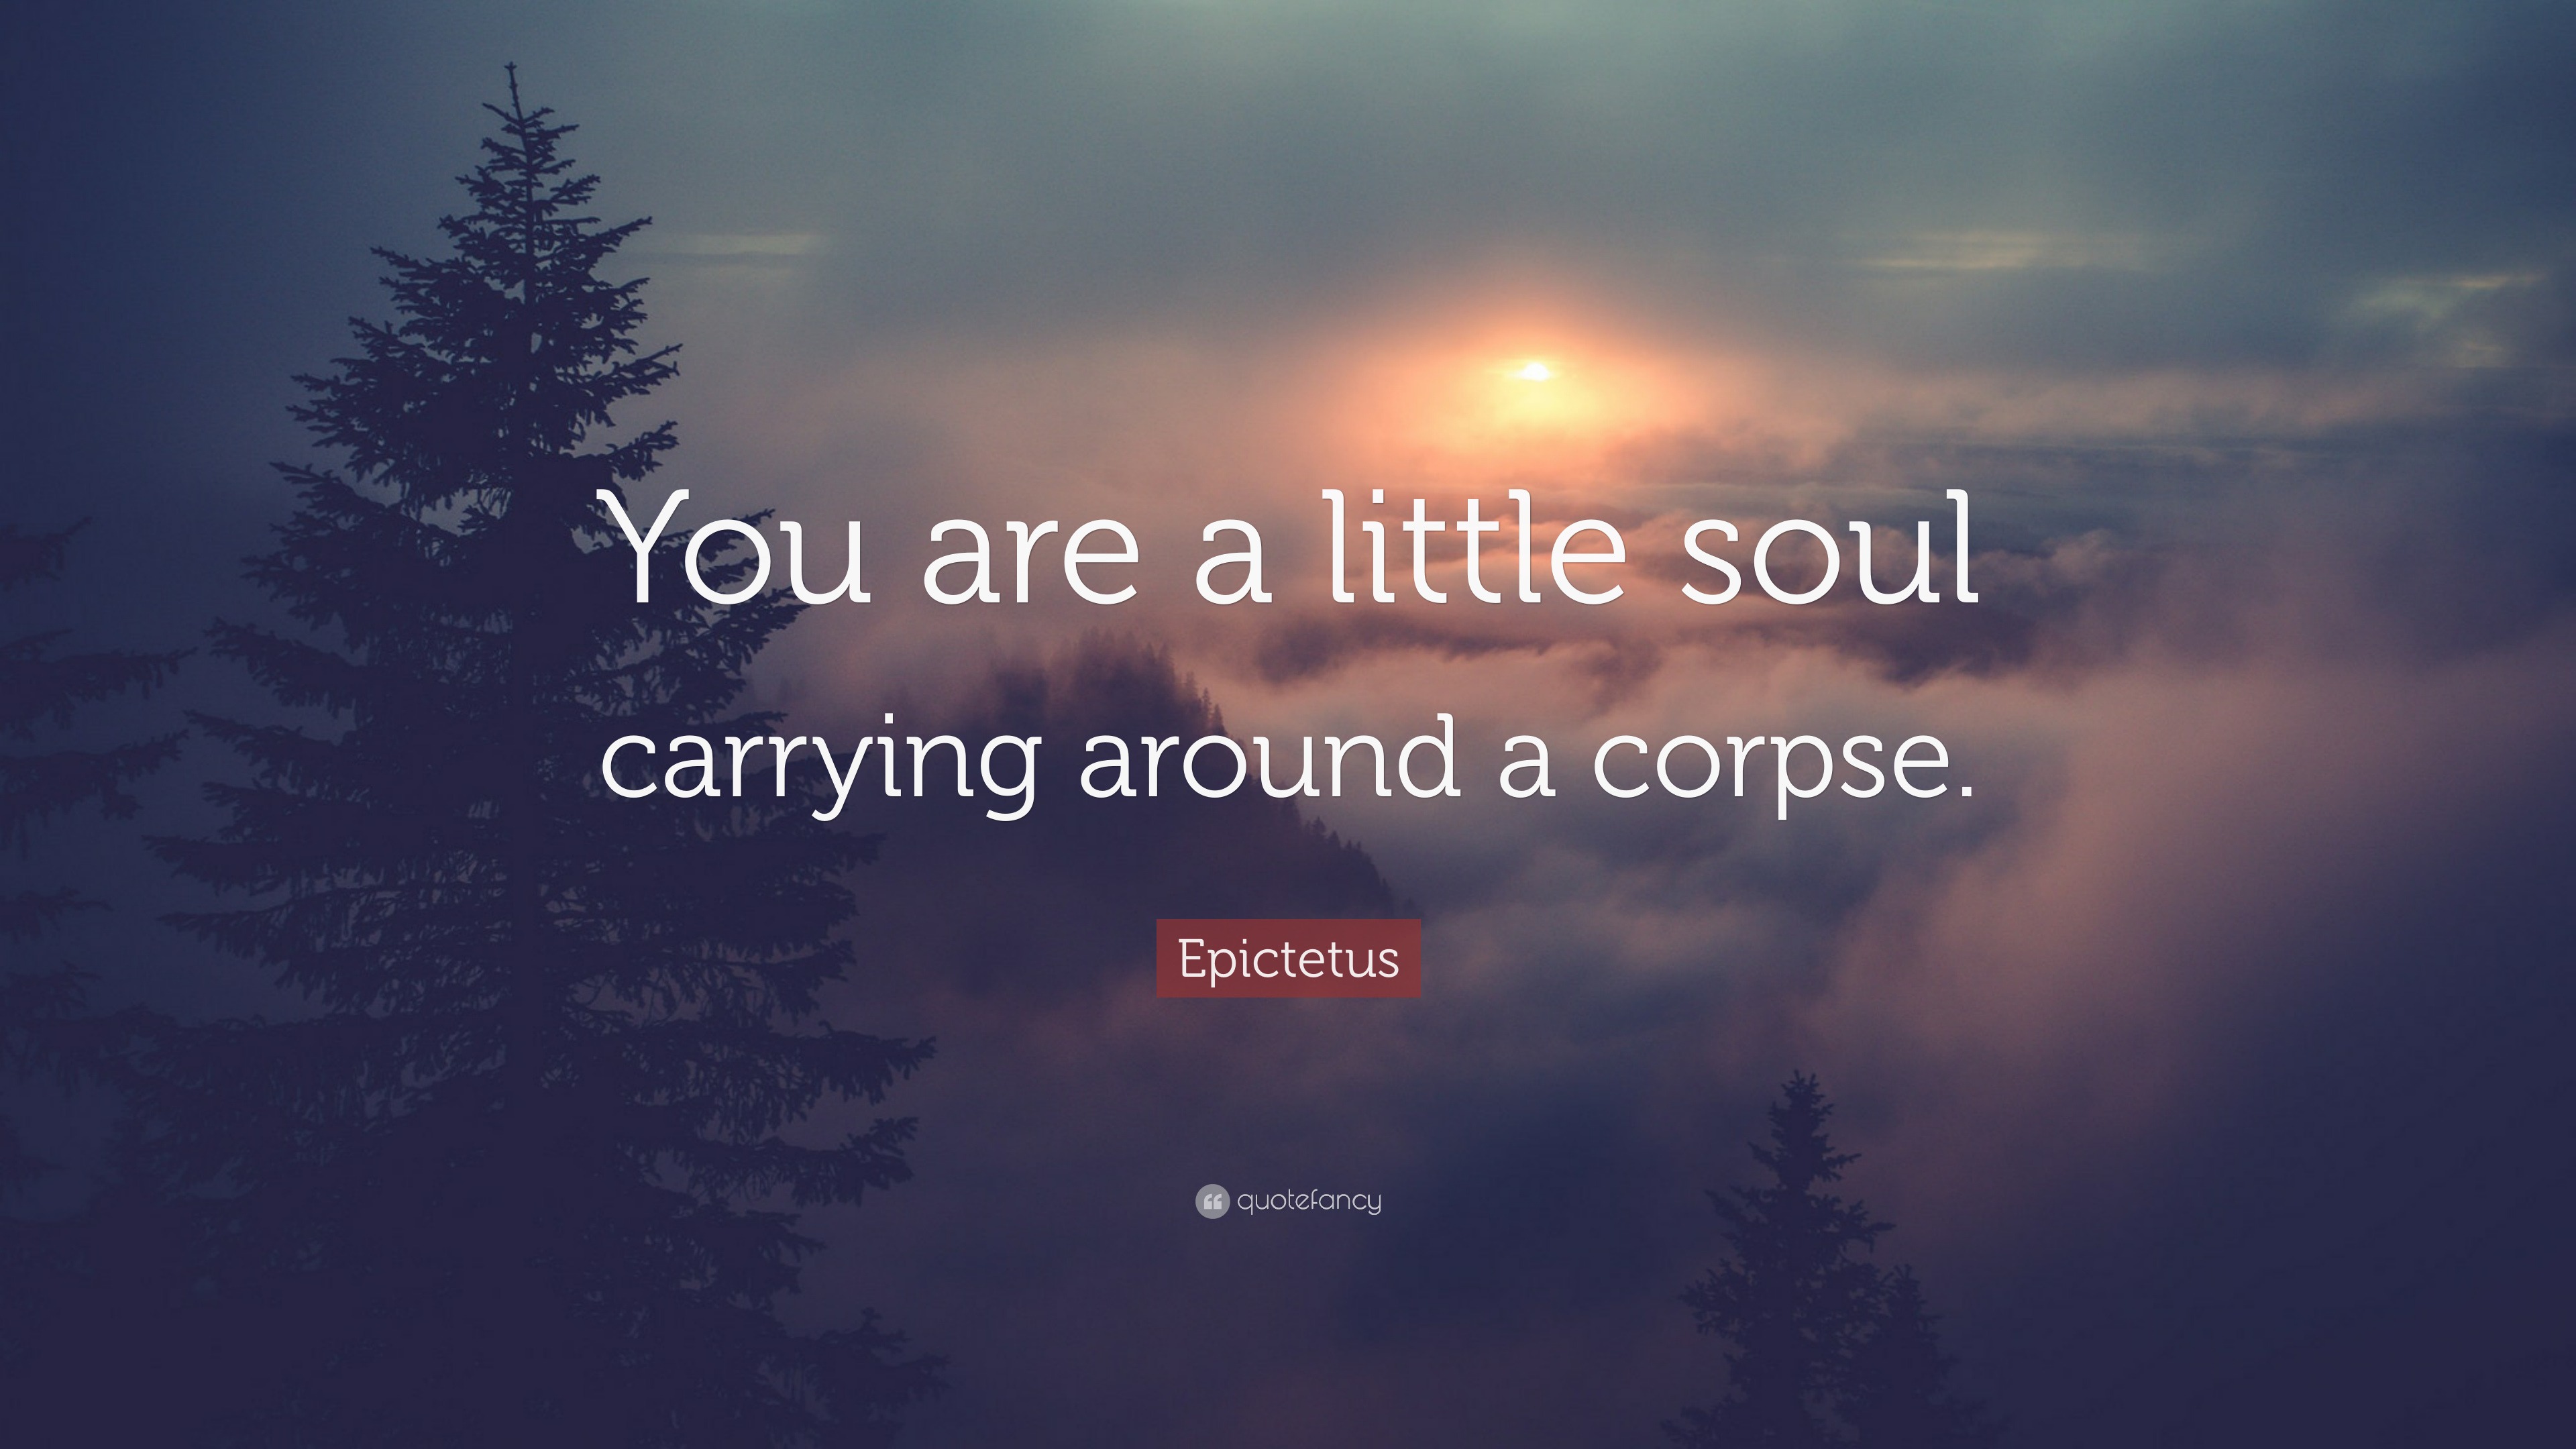 4880882-Epictetus-Quote-You-are-a-little-soul-carrying-around-a-corpse.jpg